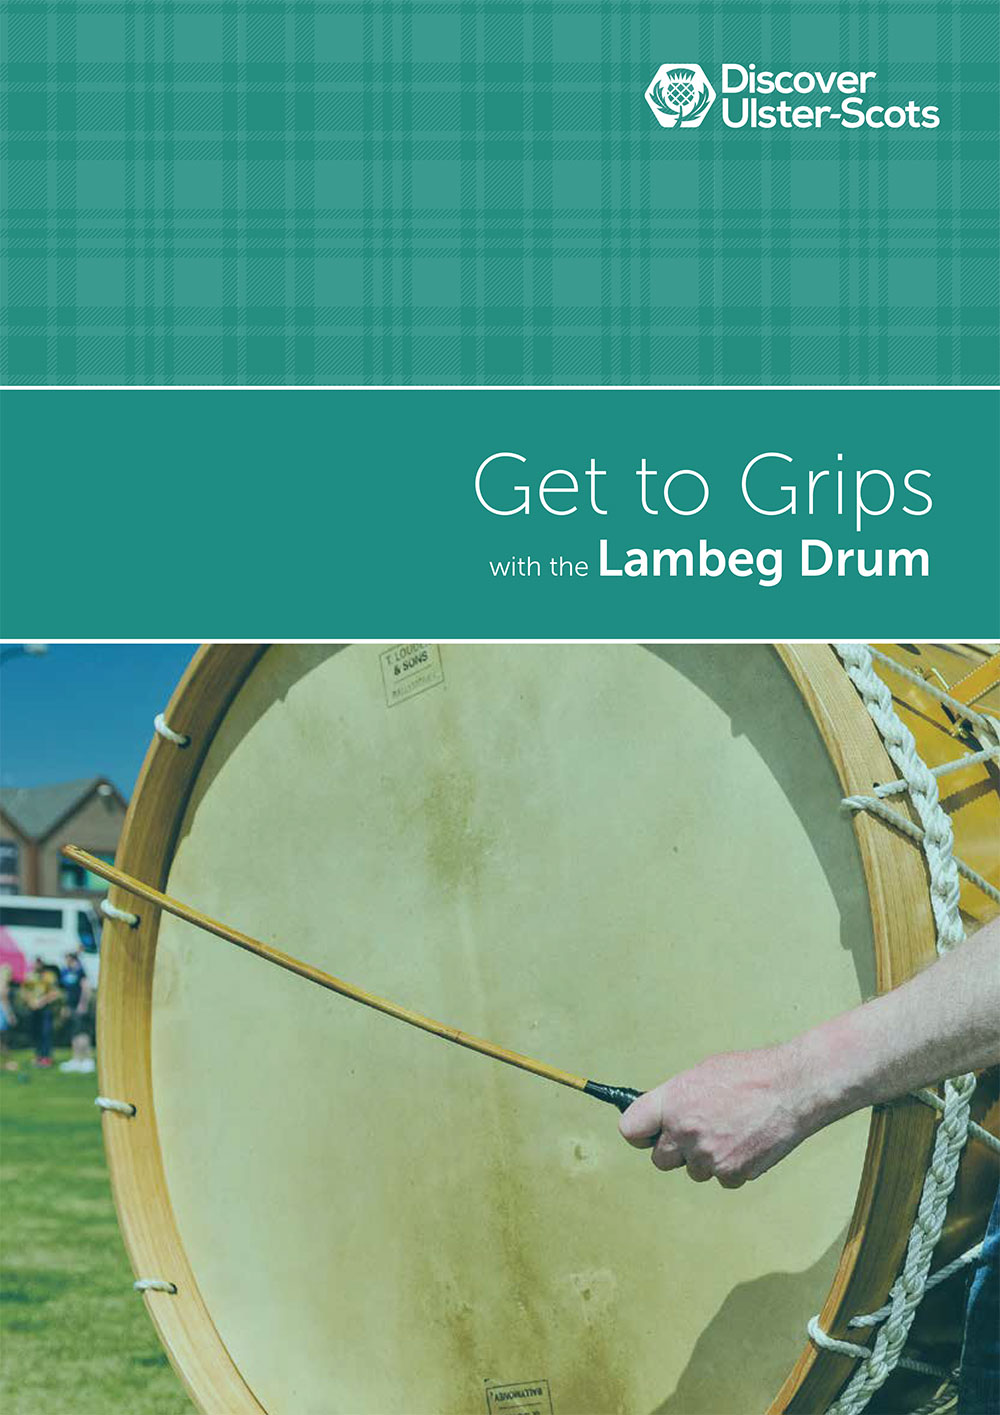 Get to Grips with the Lambeg Drum